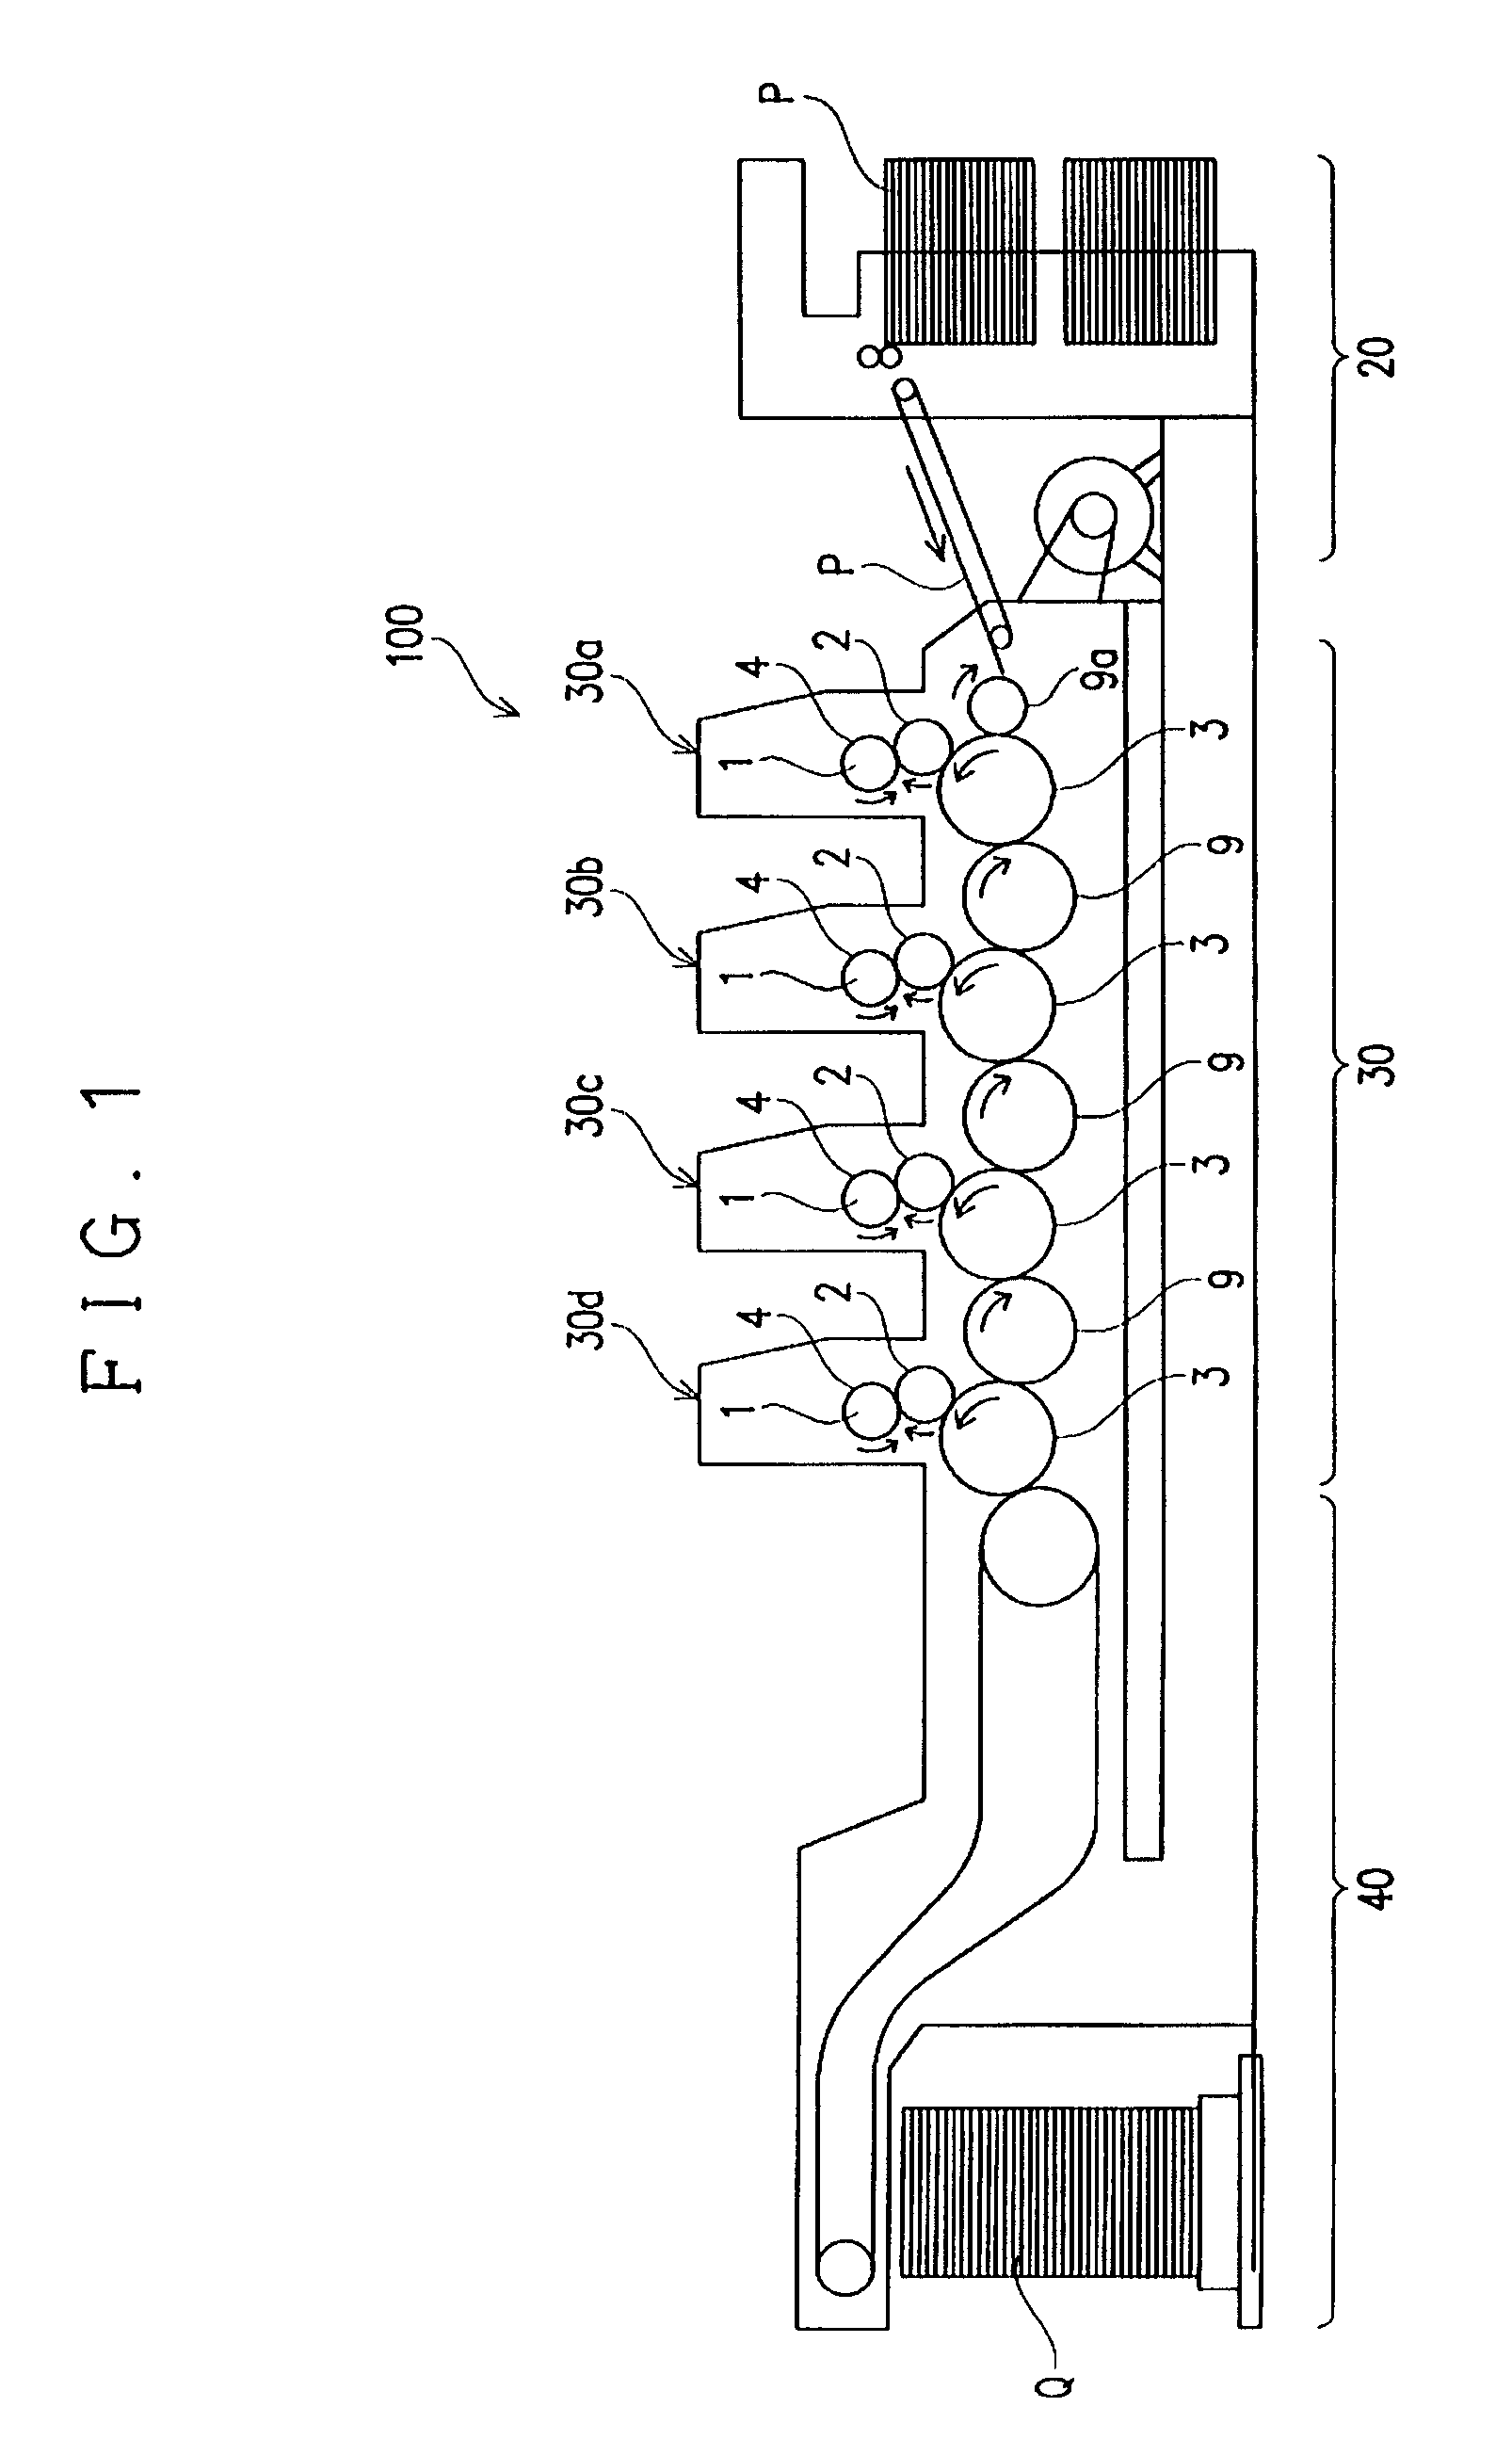 Method and Apparatus of Controlling Quality of Printed Image for Color Printing Press